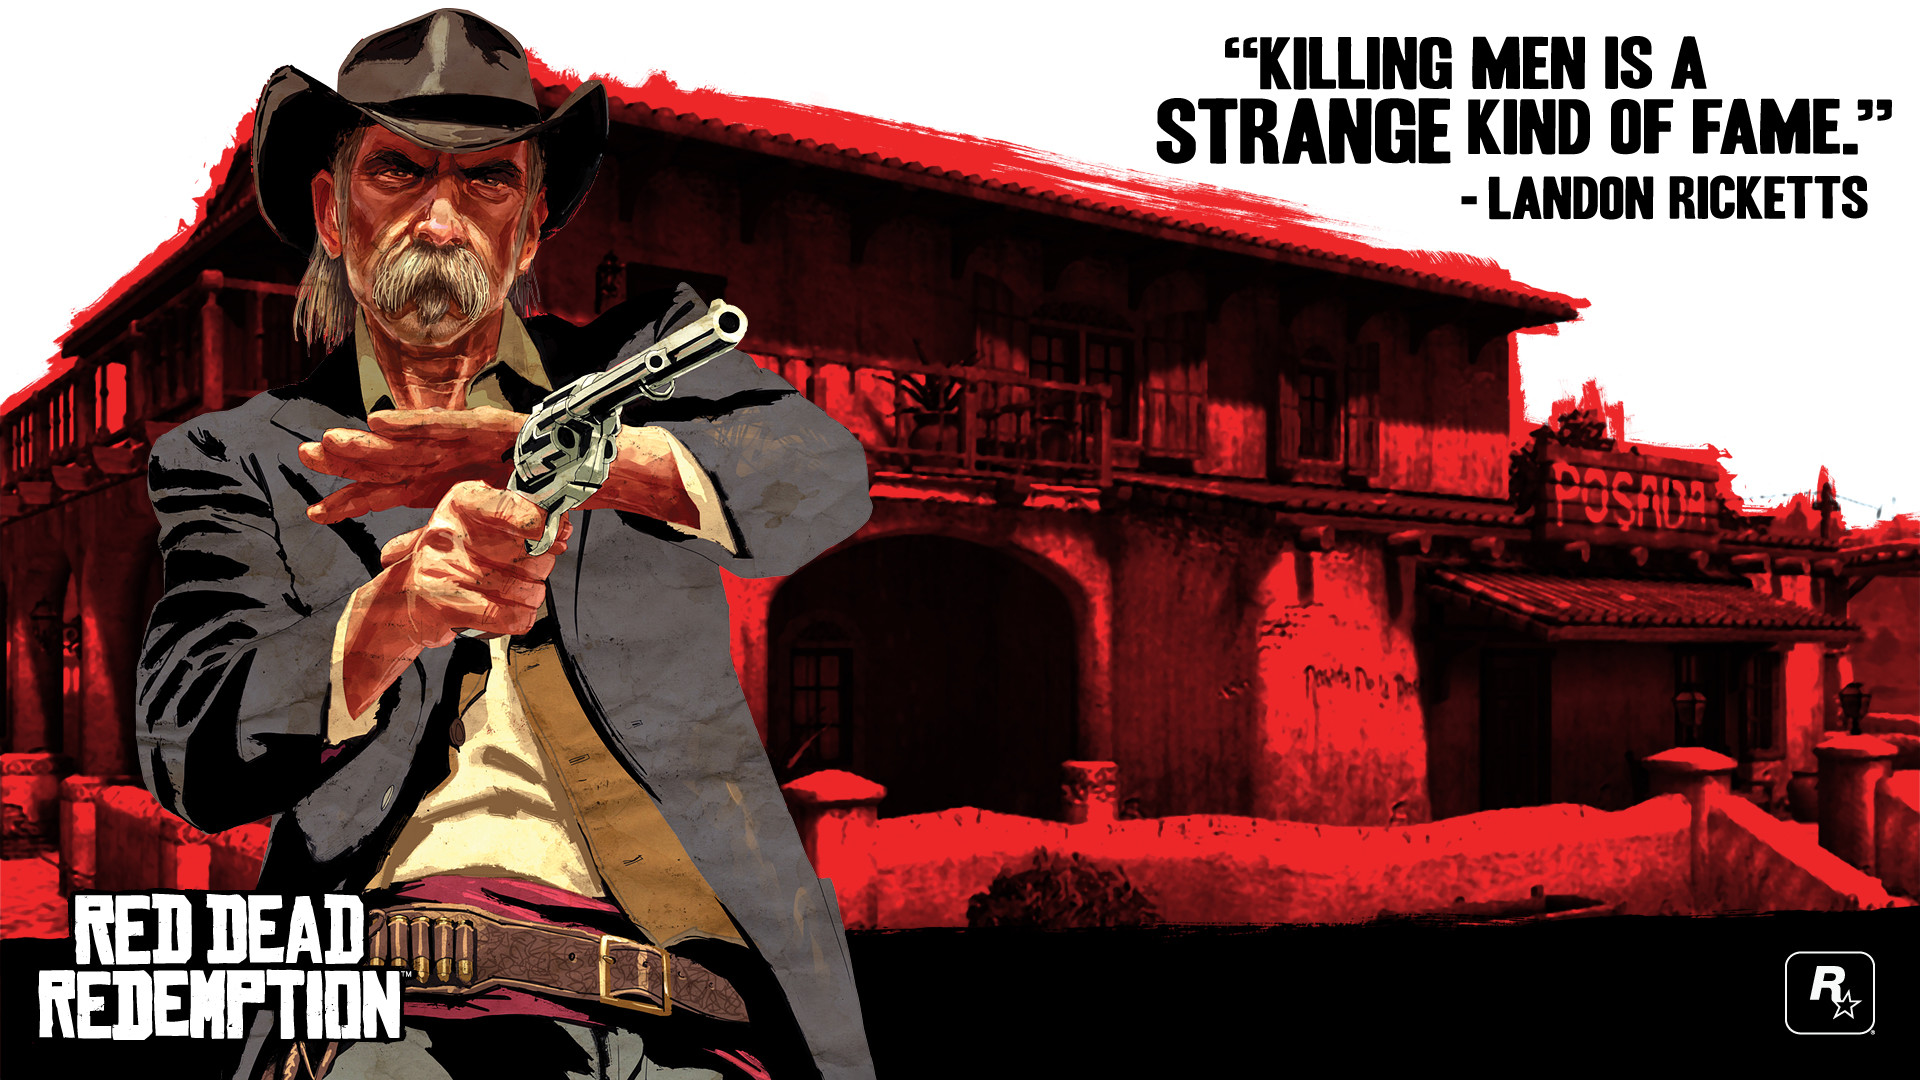 1920x1080 Red Dead Redemption | Red Dead Redemption wallpaper 6 - Jeux vidÃ©o -  Wallpapers Directory